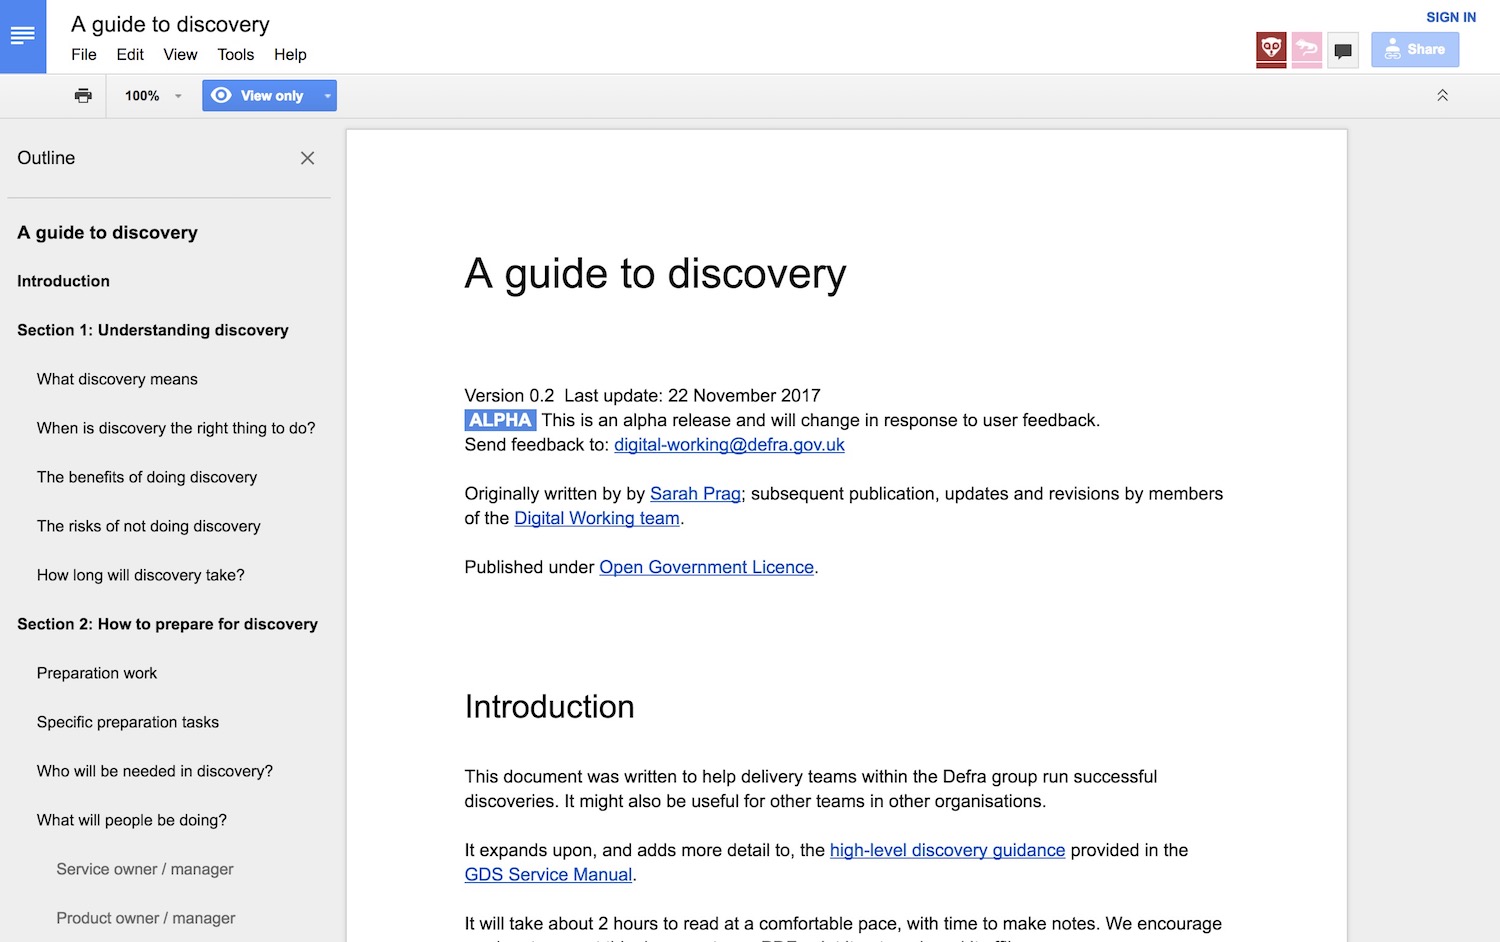 Editing the 'Guide to Discovery'